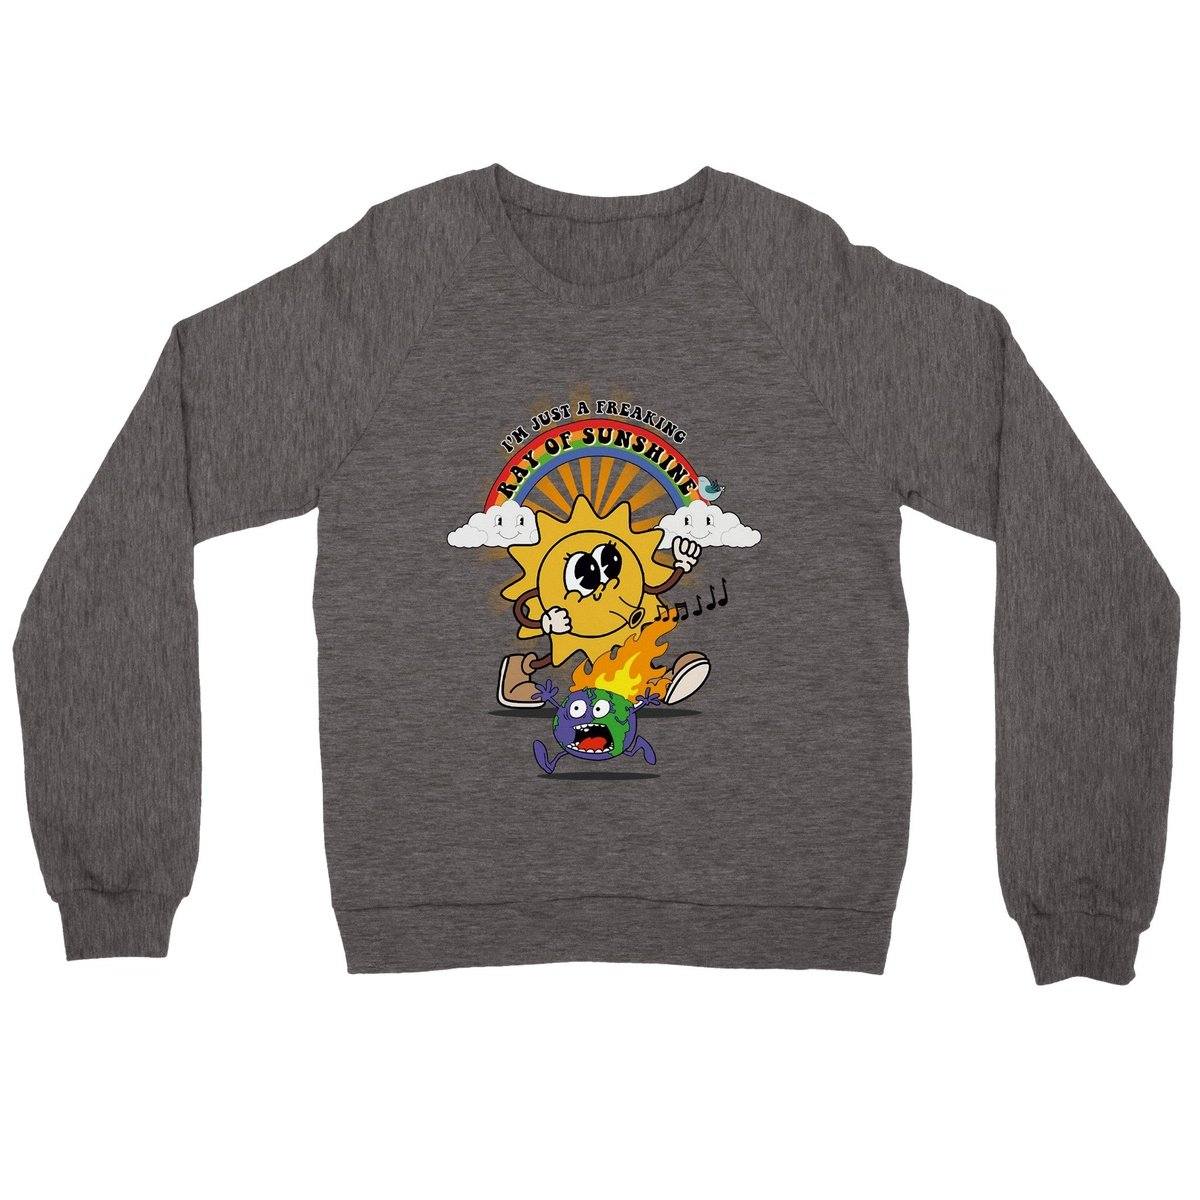 I'm Just A Freaking Ray Of Sunshine Jumper Australia Online Color Charcoal Heather / S